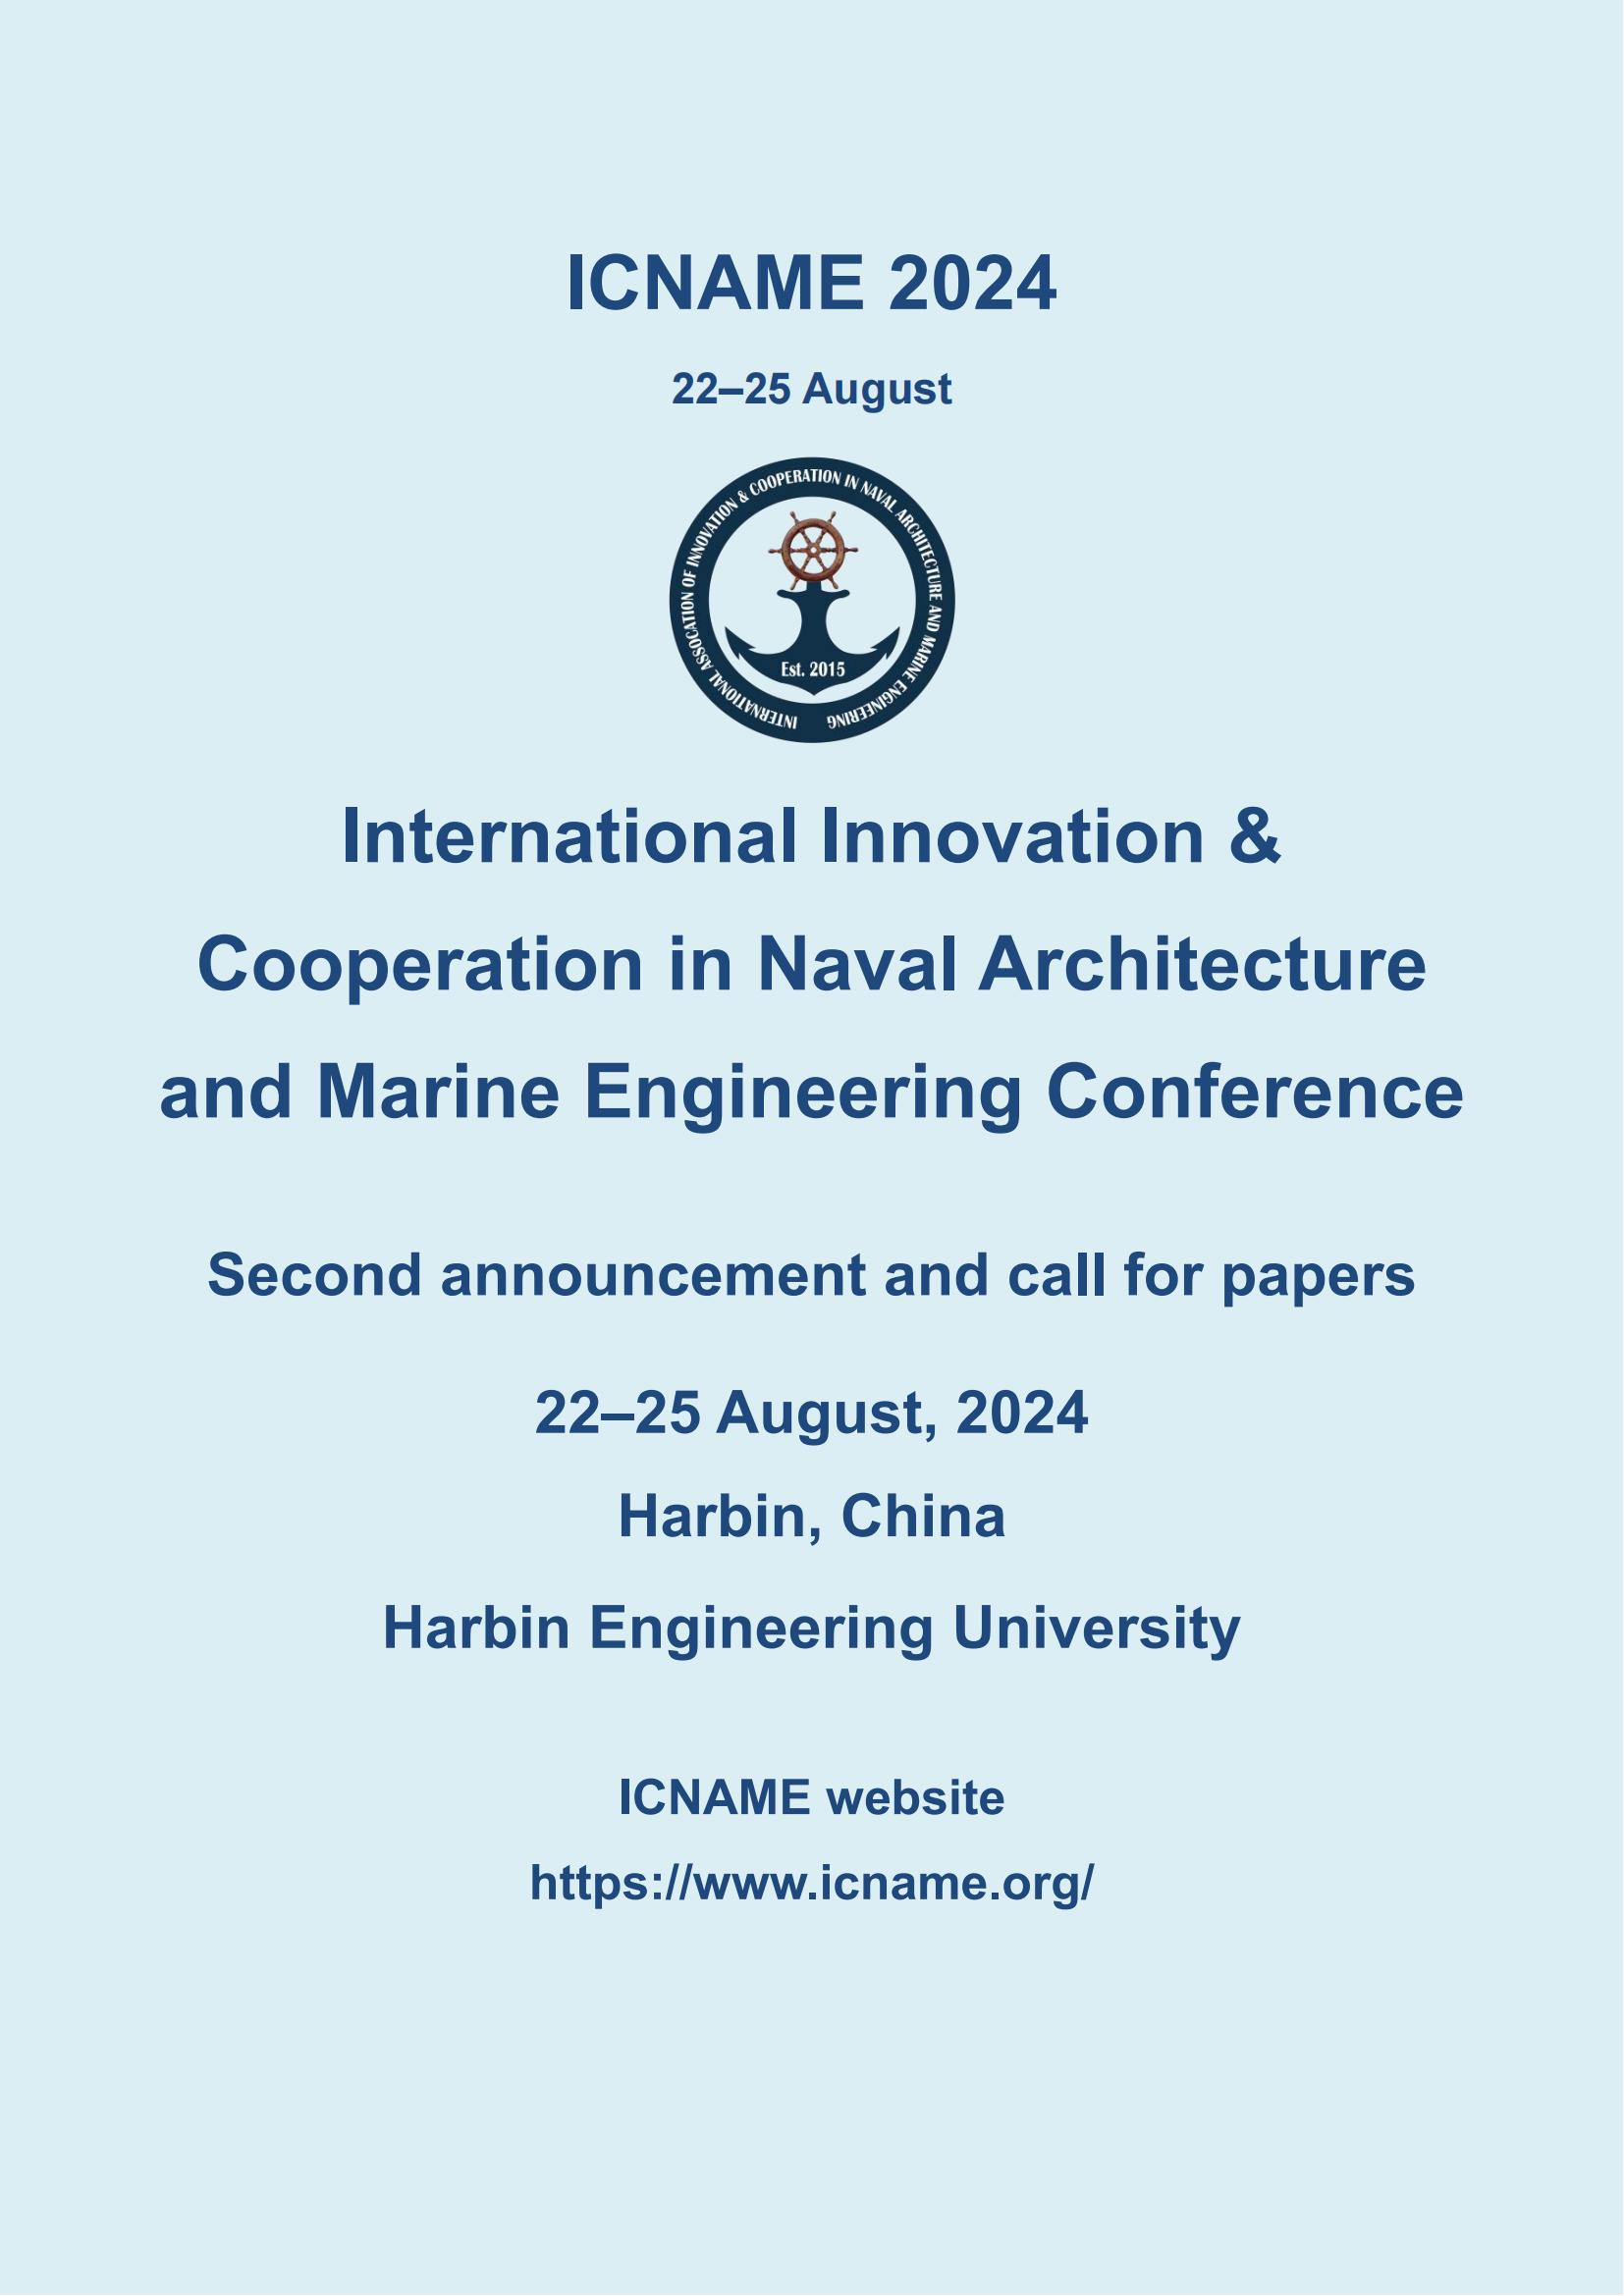 ICNAME2024 2nd Announcement and Call for Papers-Revised-2_00.jpg